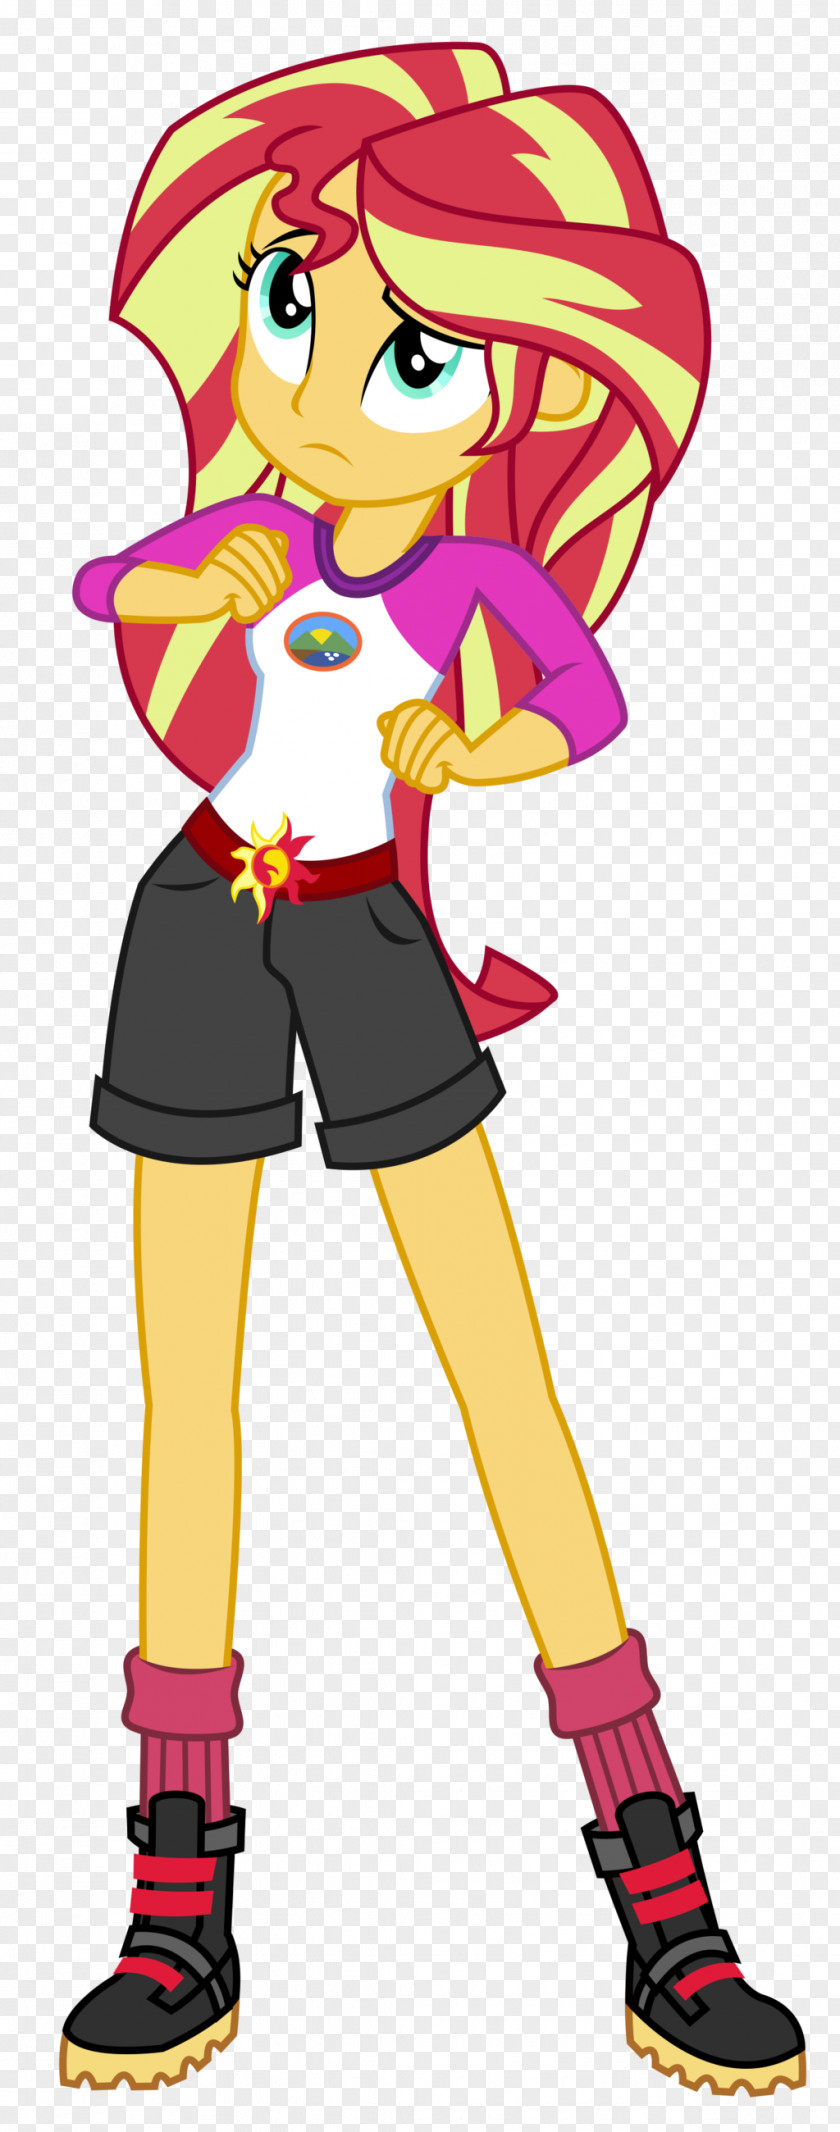 SUNSET VECTOR Sunset Shimmer Twilight Sparkle Rainbow Dash Escape By Moonlight Art PNG